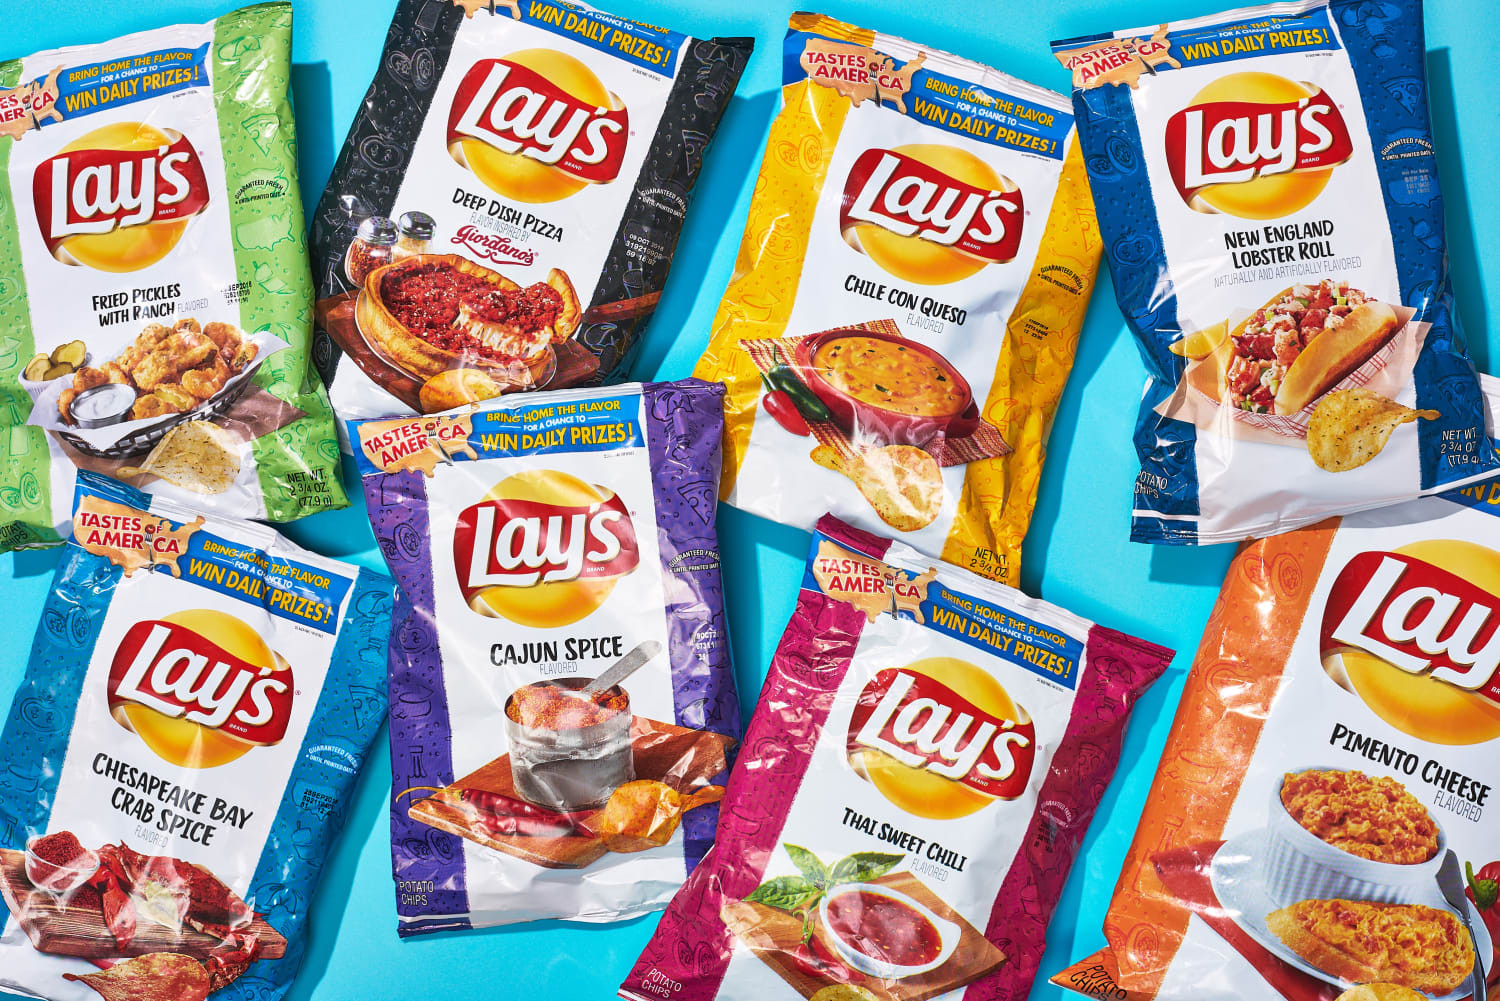 Lays Potato Chips Flavors
 We Tried the 8 New Flavors of Lay s Potato Chips